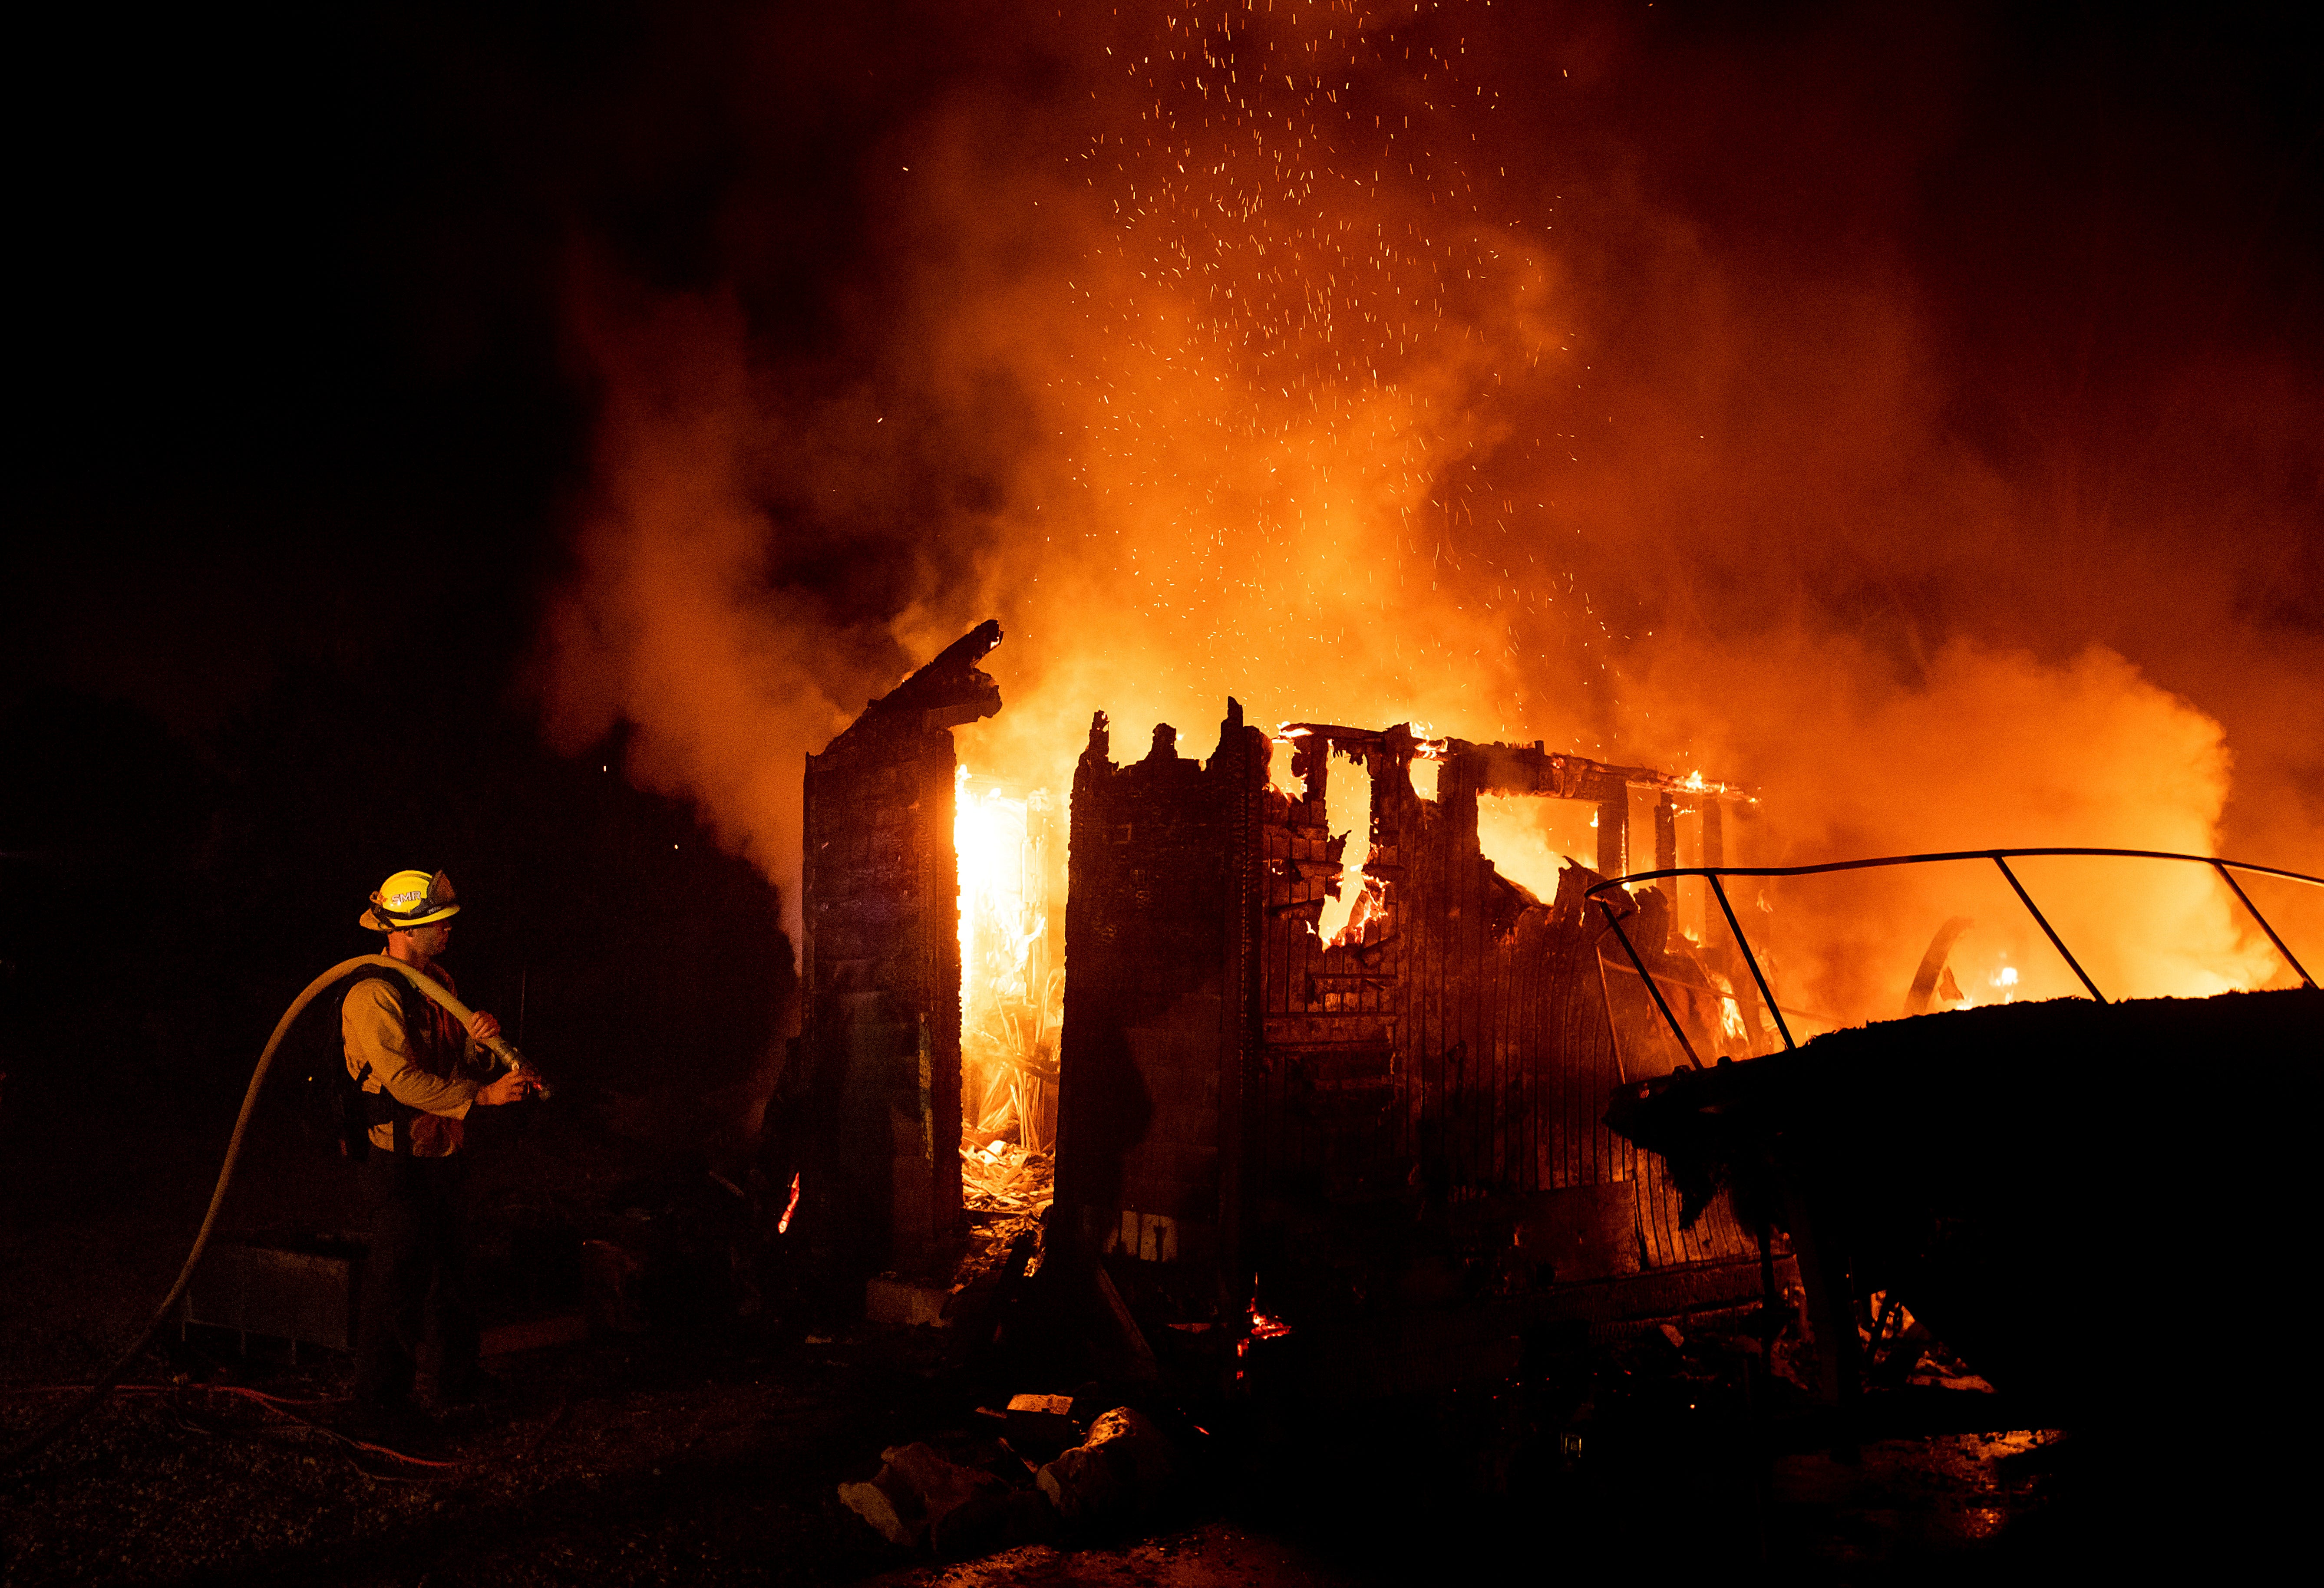 Firefighter Jay Wilkens monitors a flaming shed and boat as the Holiday fire burns in Goleta, Calif., on July 7, 2018. The blaze has destroyed multiple homes.